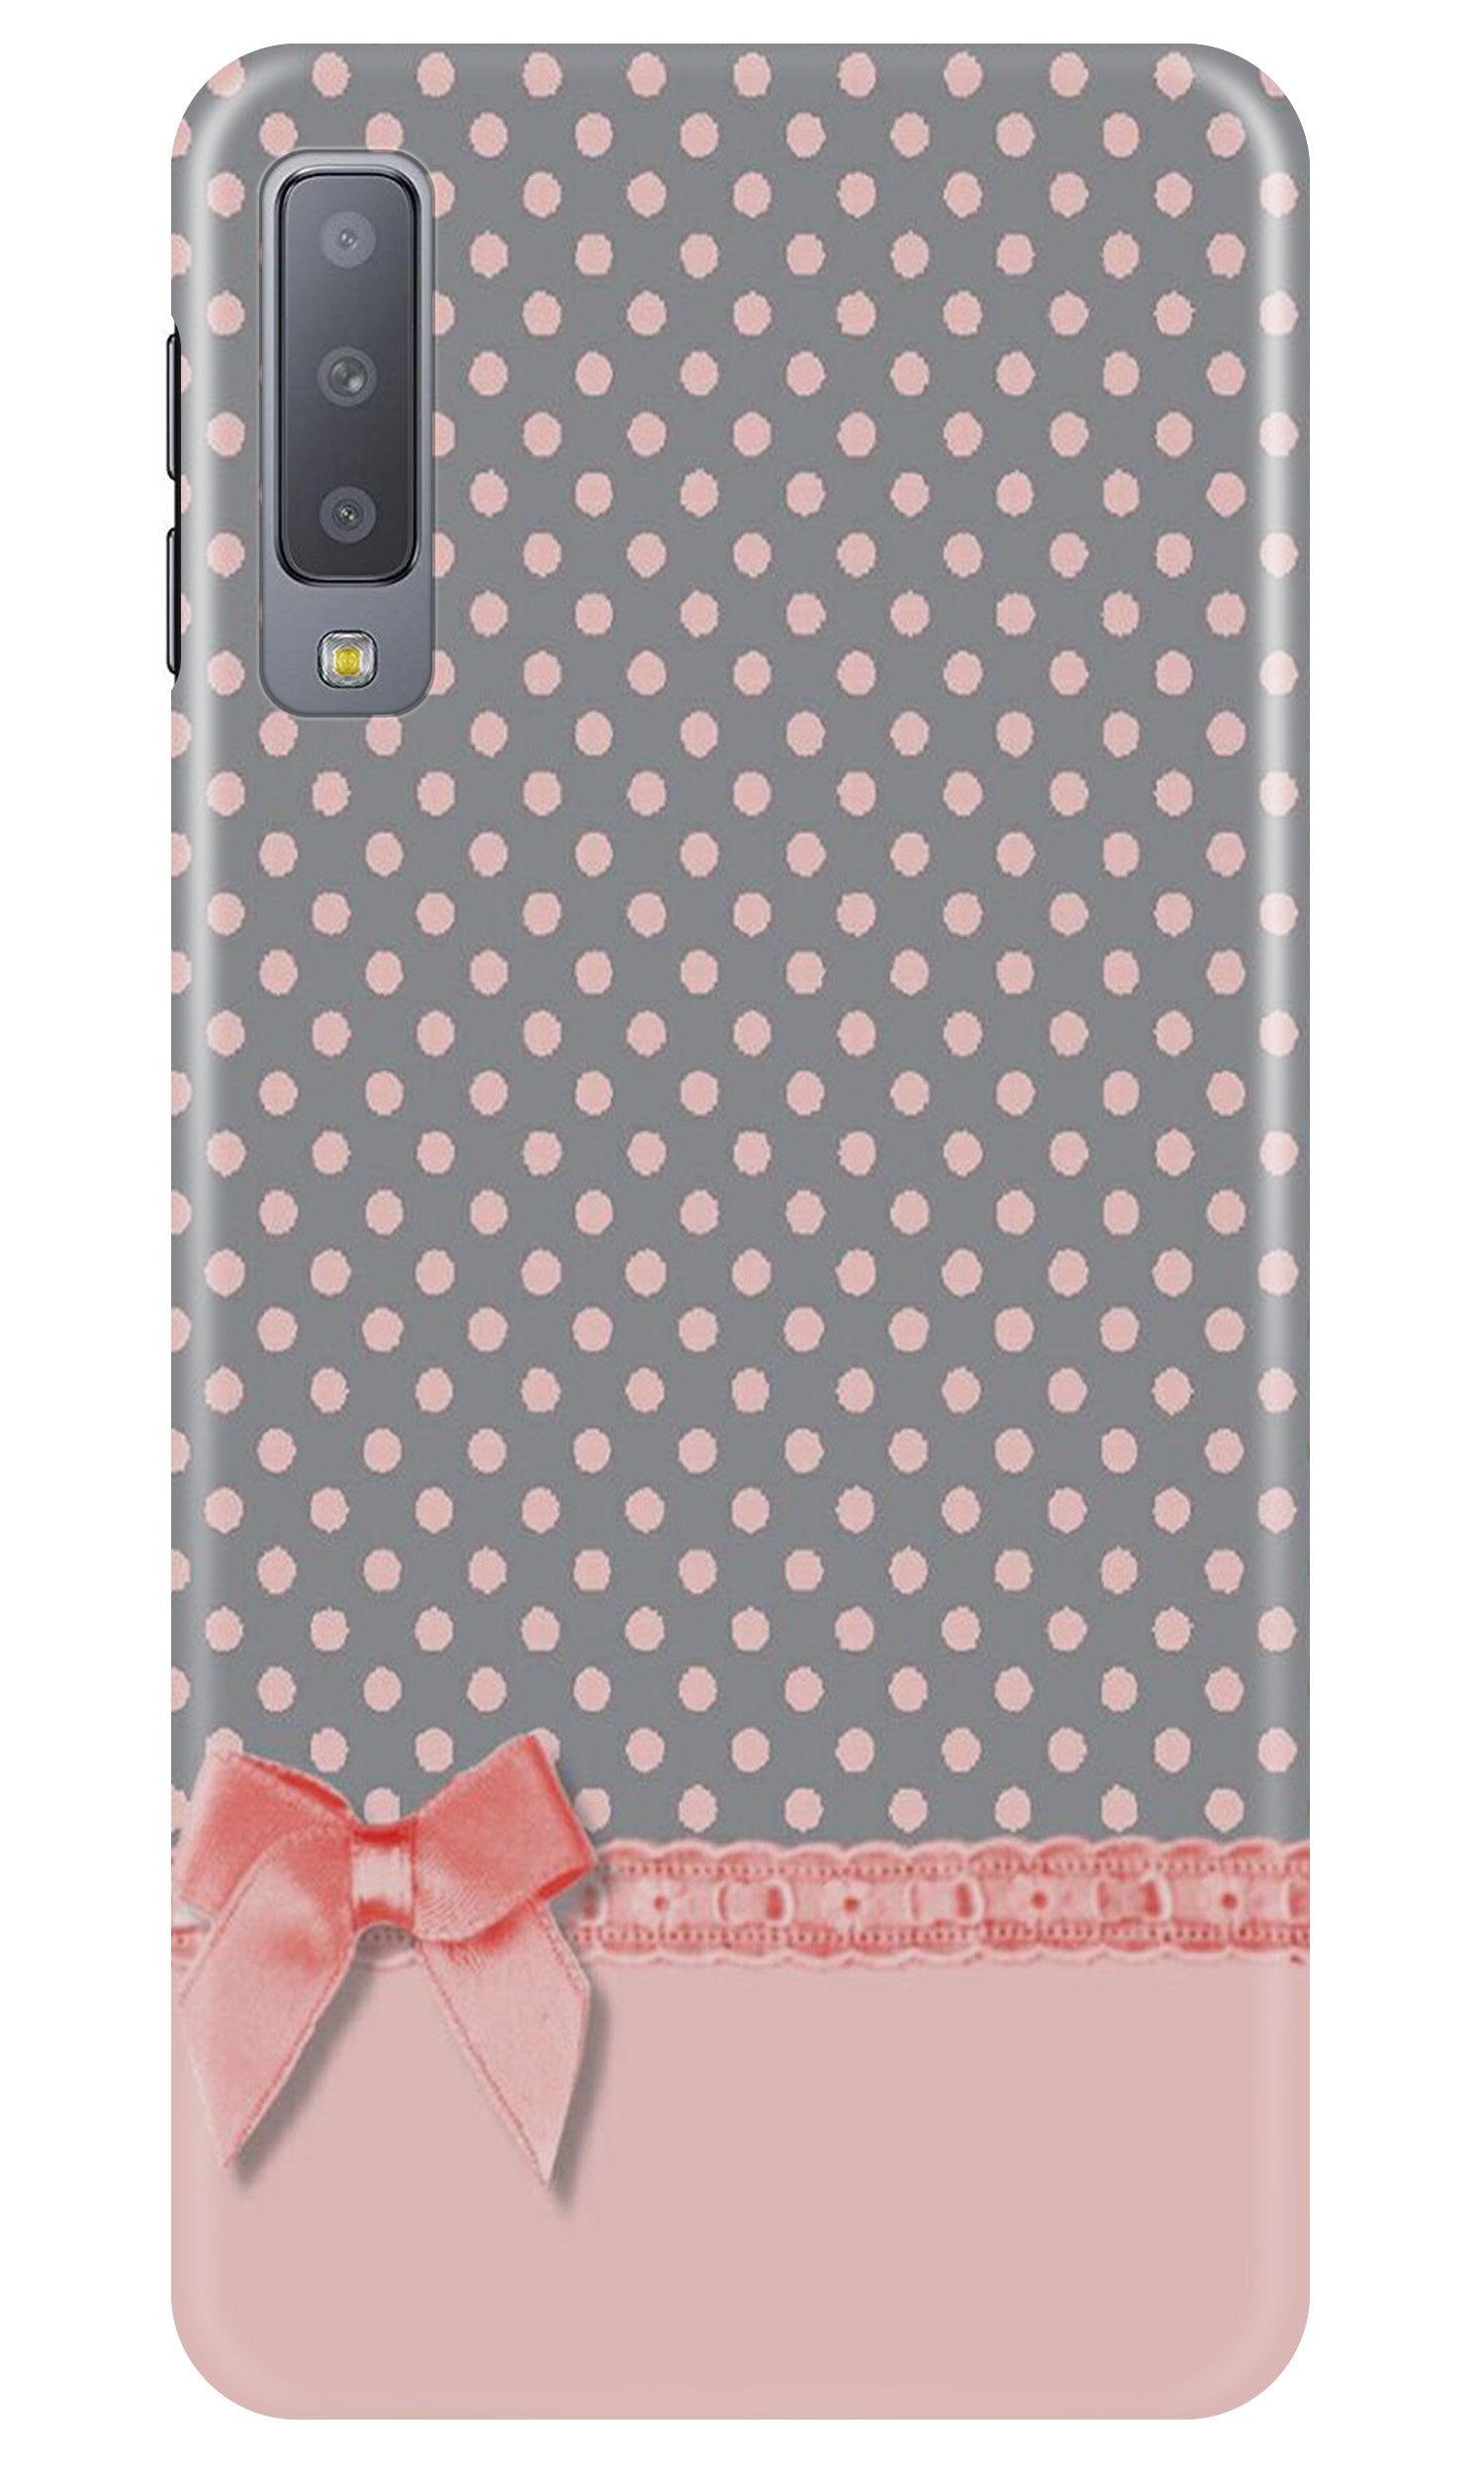 Gift Wrap2 Case for Samsung Galaxy A50s